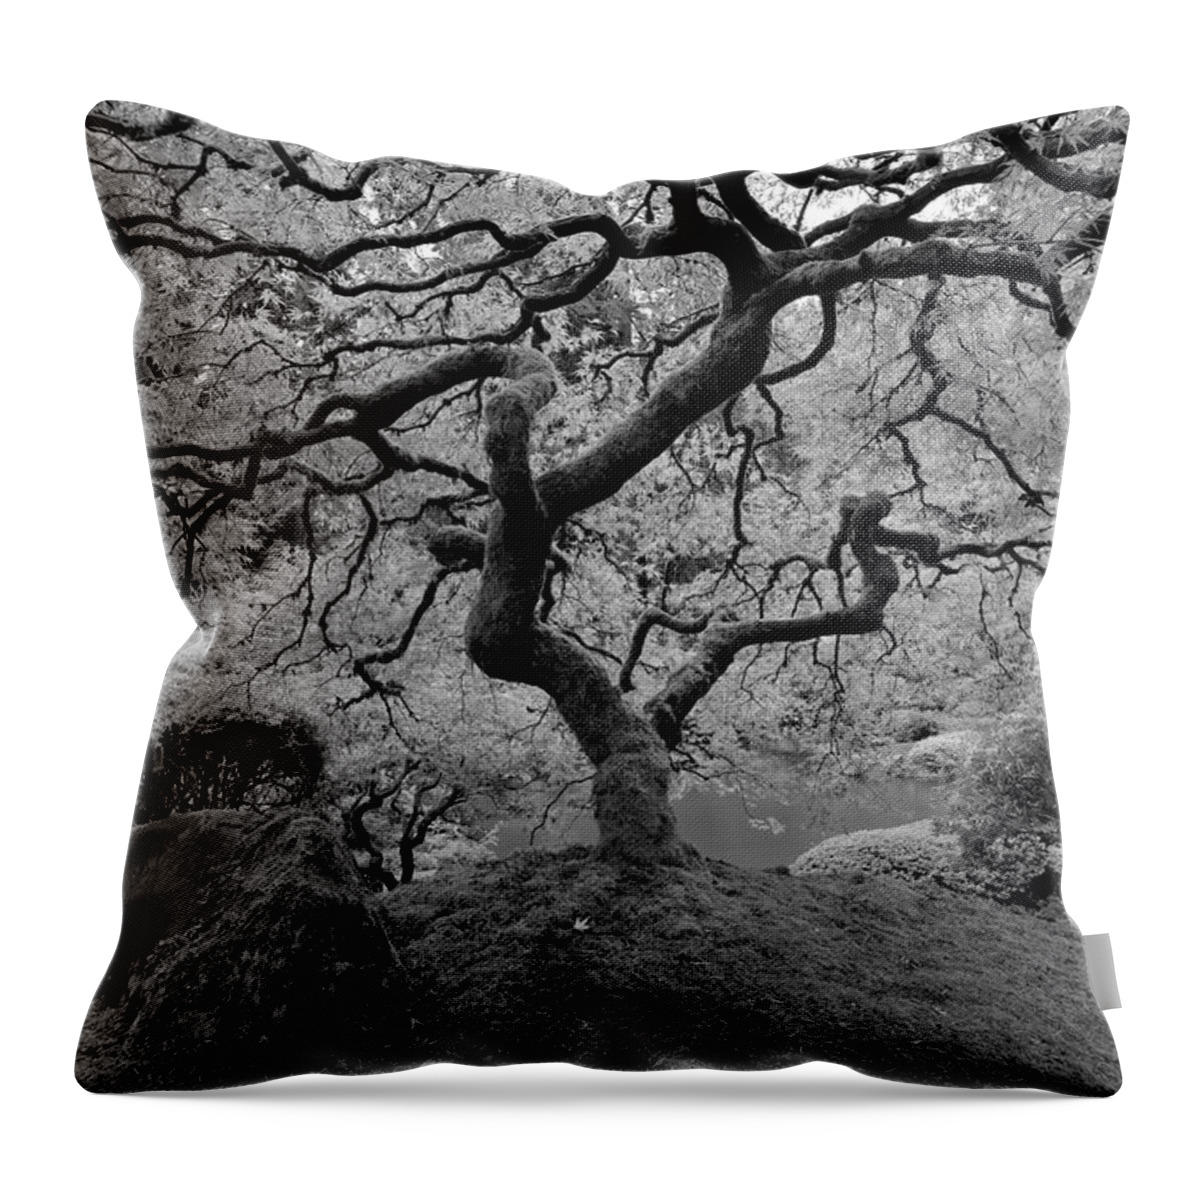 Black And White Throw Pillow featuring the photograph Wisdom BW by Jonathan Davison